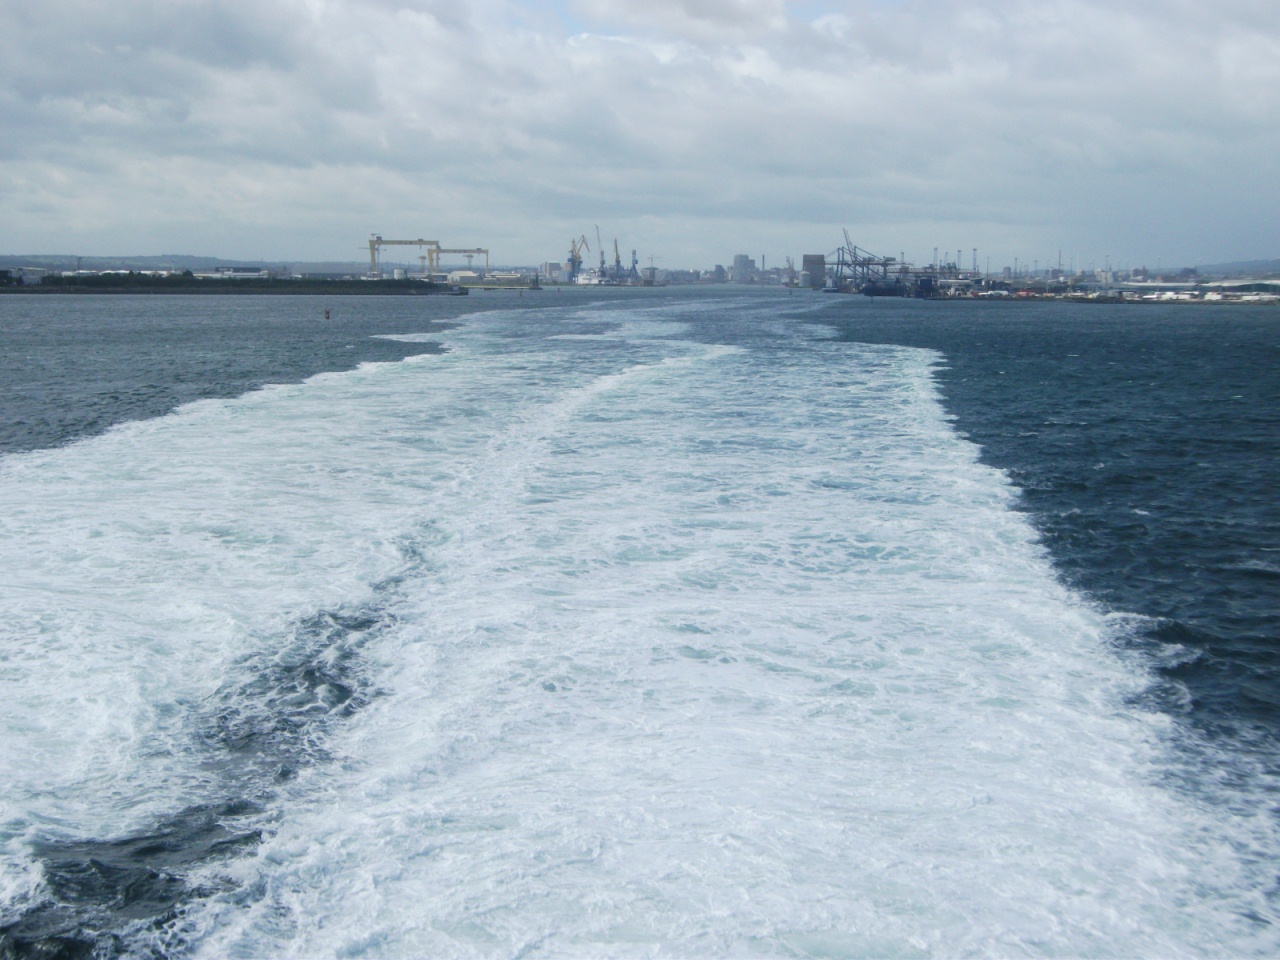 #16: A view of the City of Belfast from the Stena Voyager, en route to Stranraer.